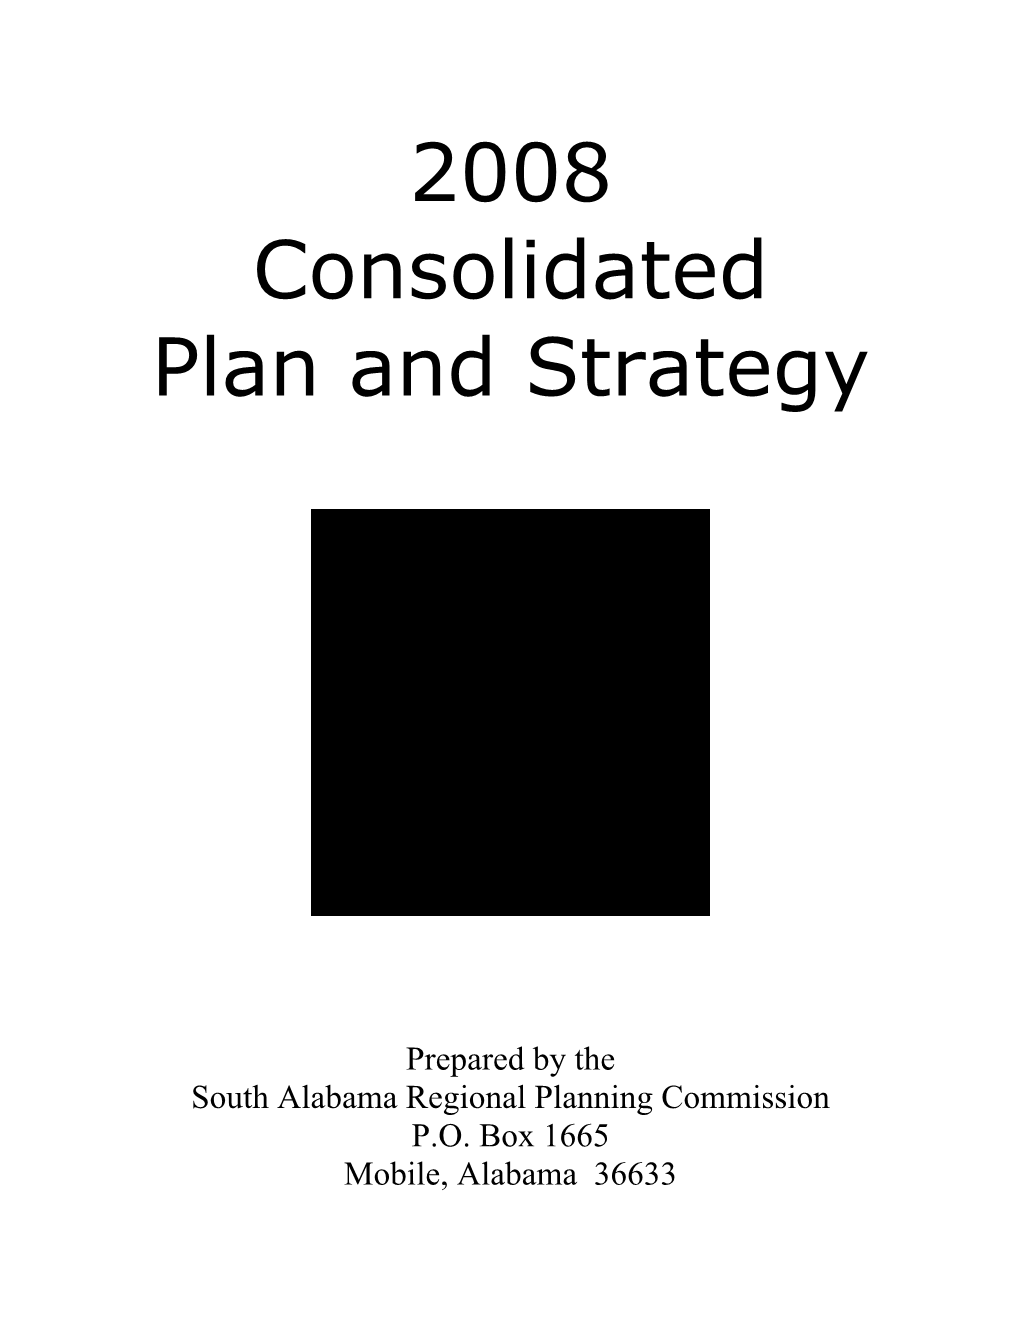 2008 Consolidated Plan and Strategy